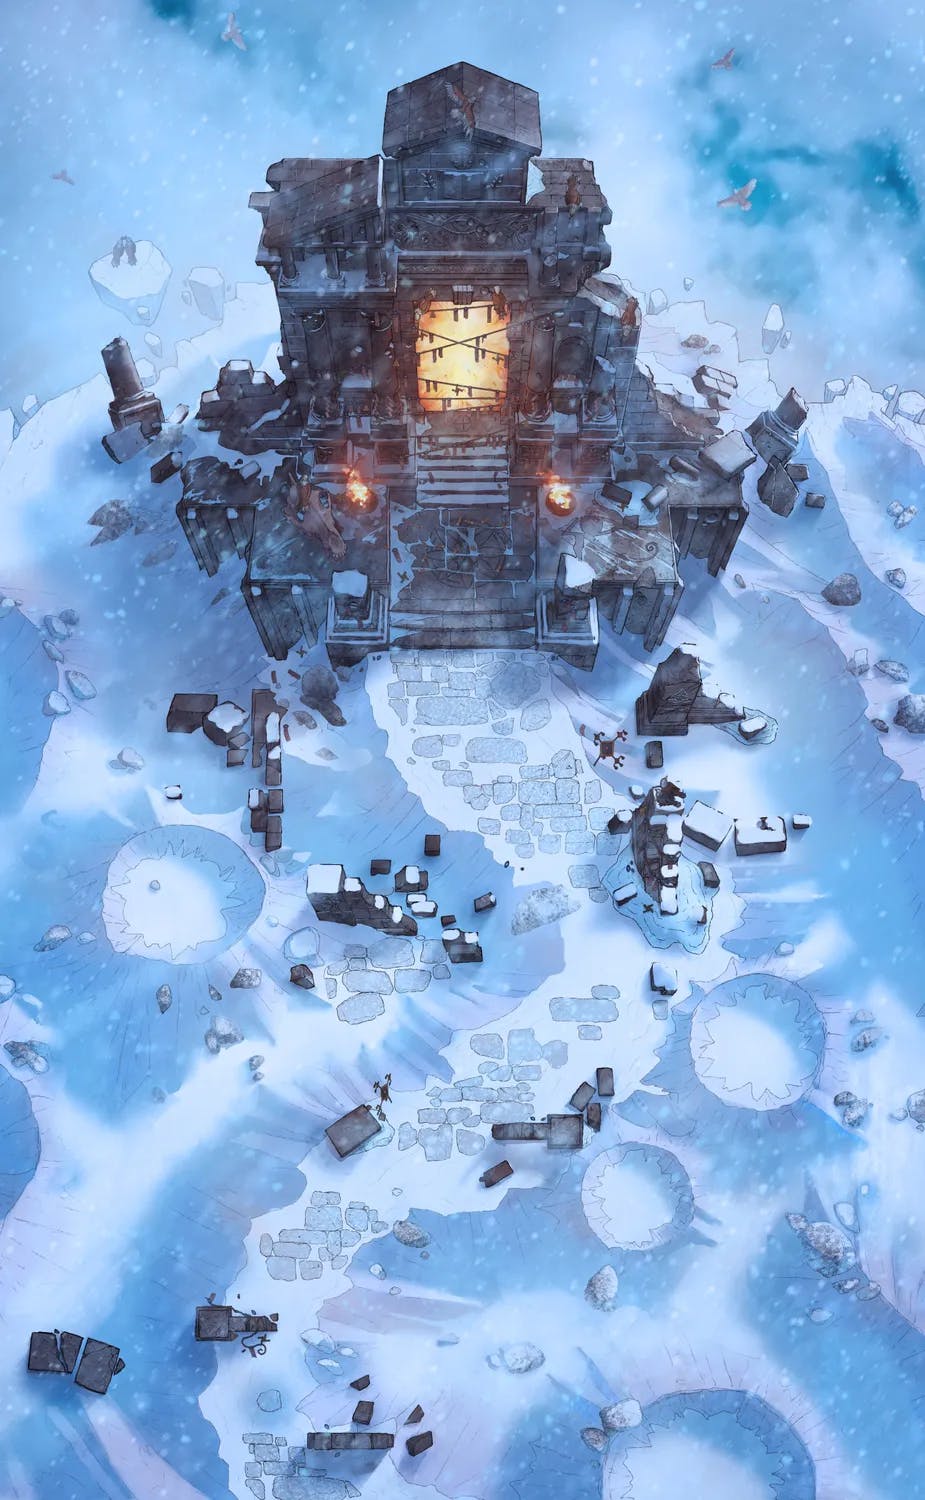 Wizard Prison Pt. 1 map, Winter Day variant thumbnail